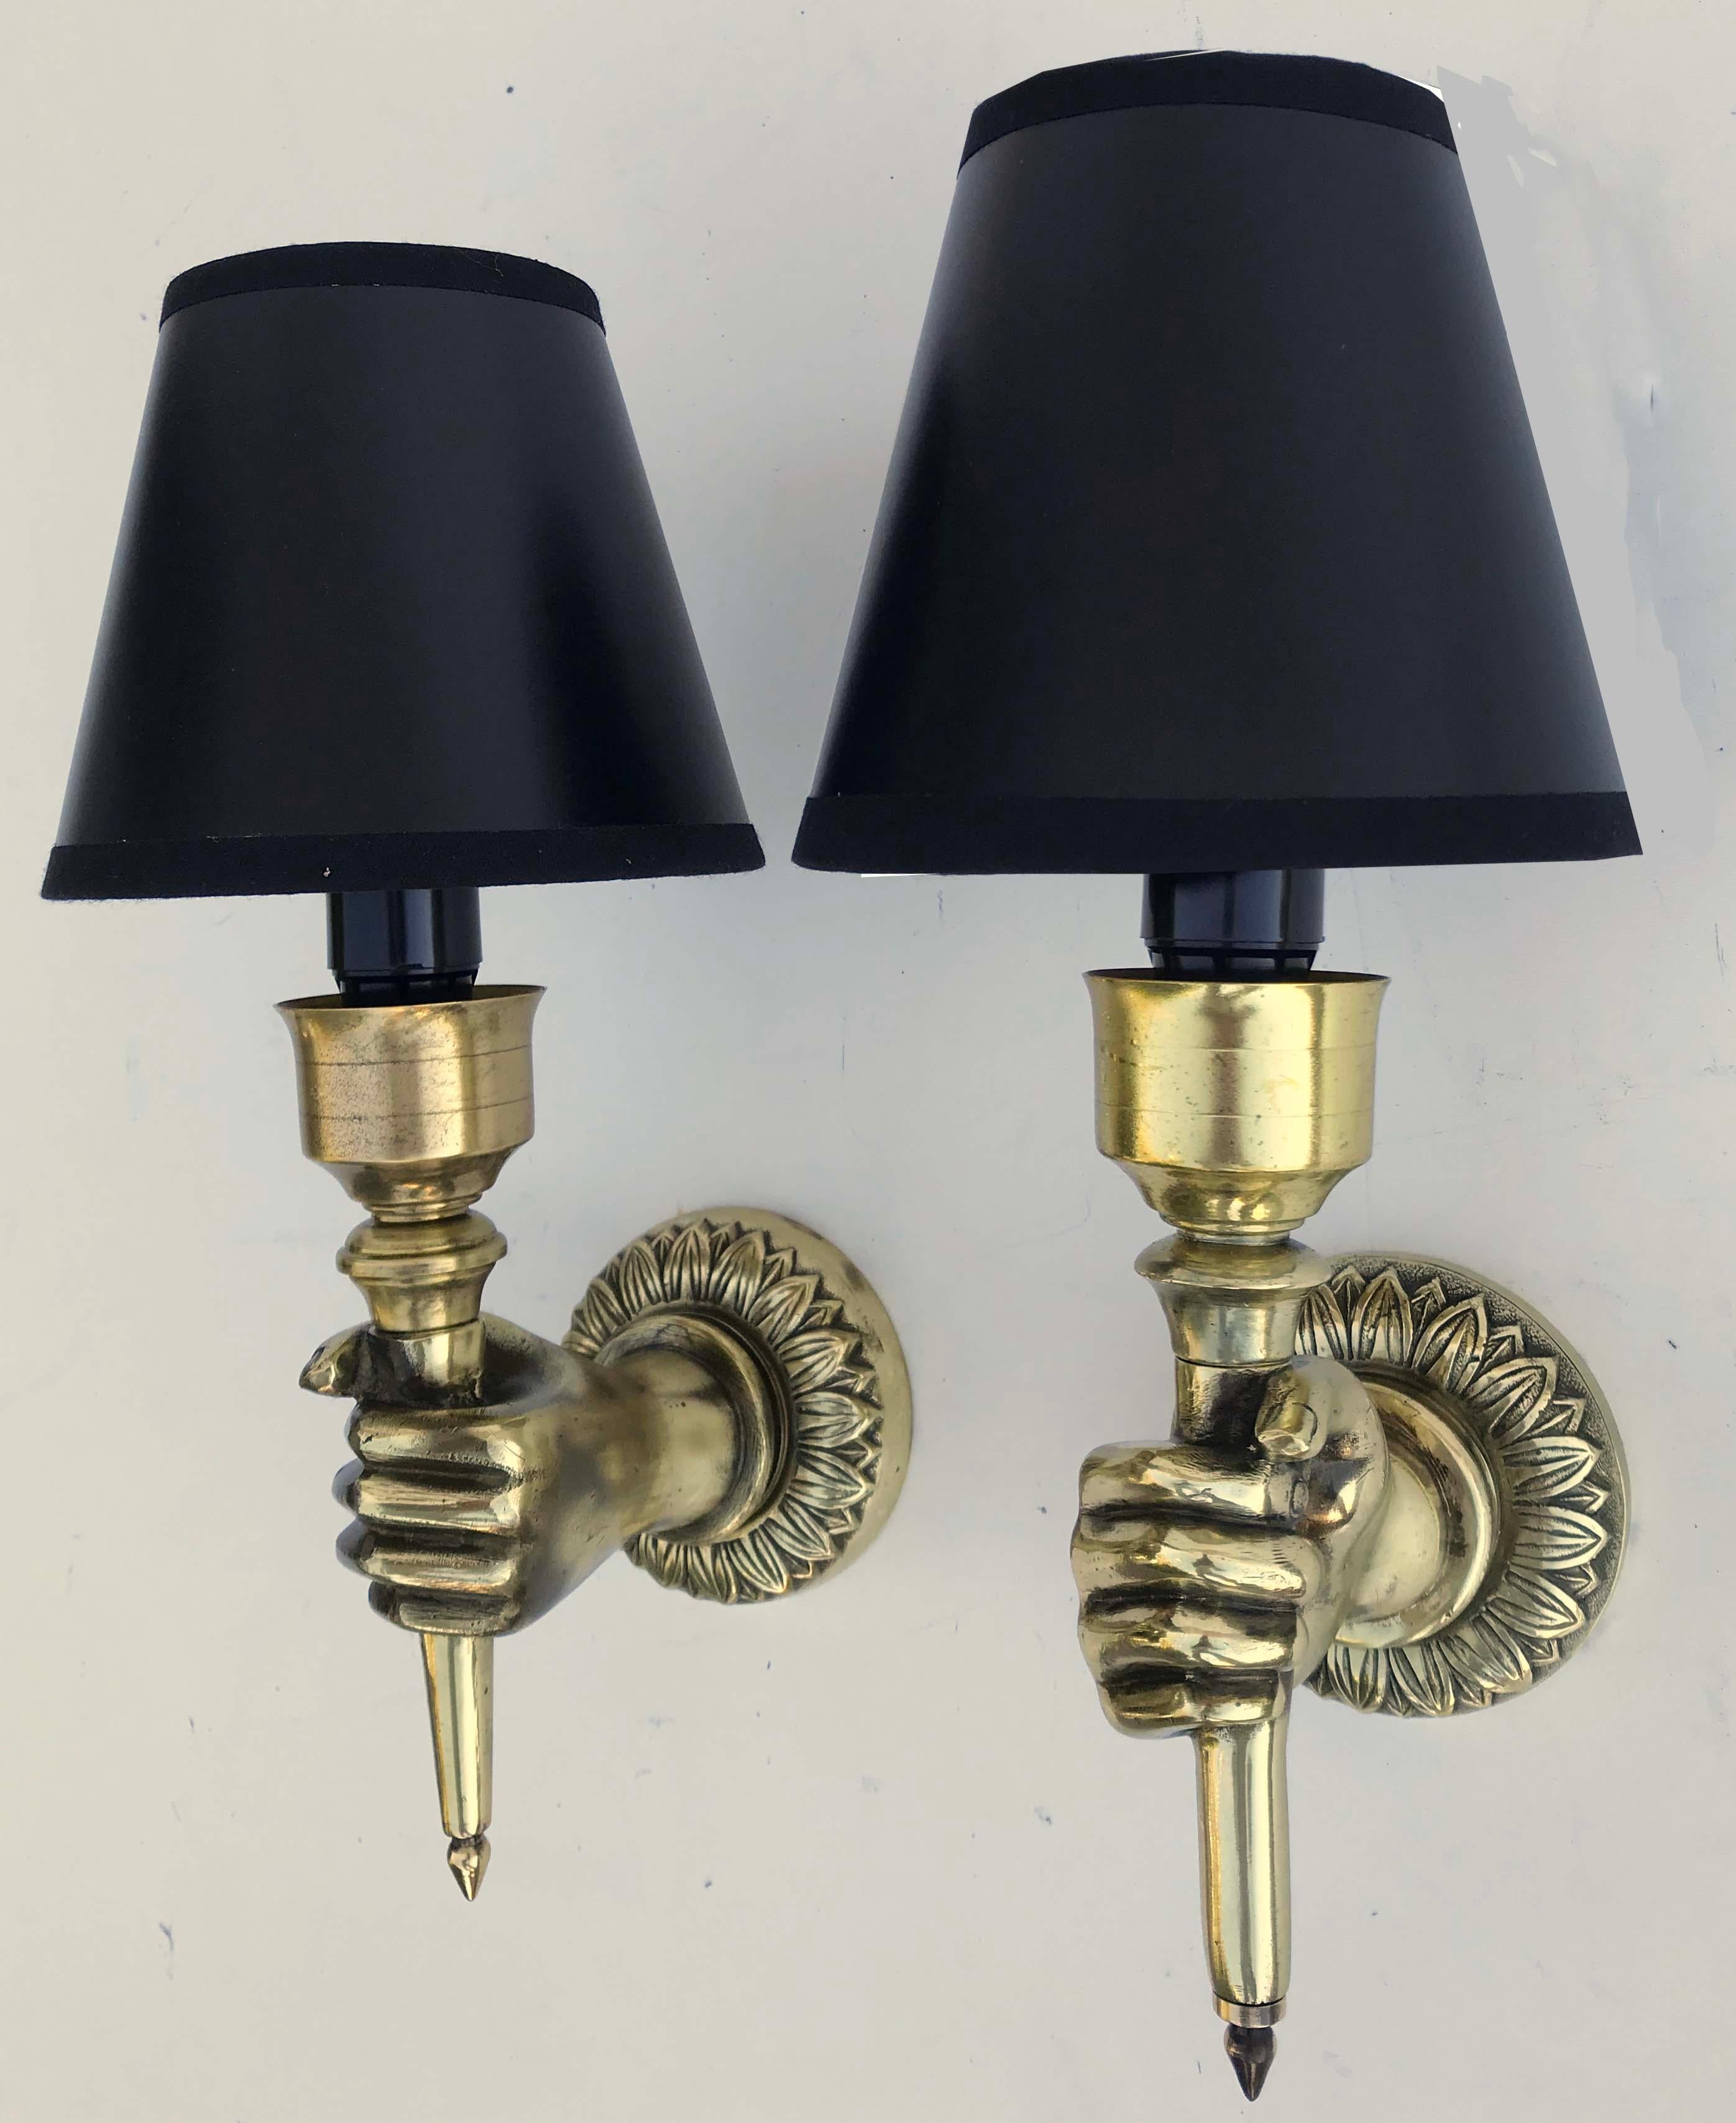 Superb pair of bronze hand sconces by Andre Arbus
1 light, 40 watts max bulb
US rewire and in working condition
Back plate : 3.1/4